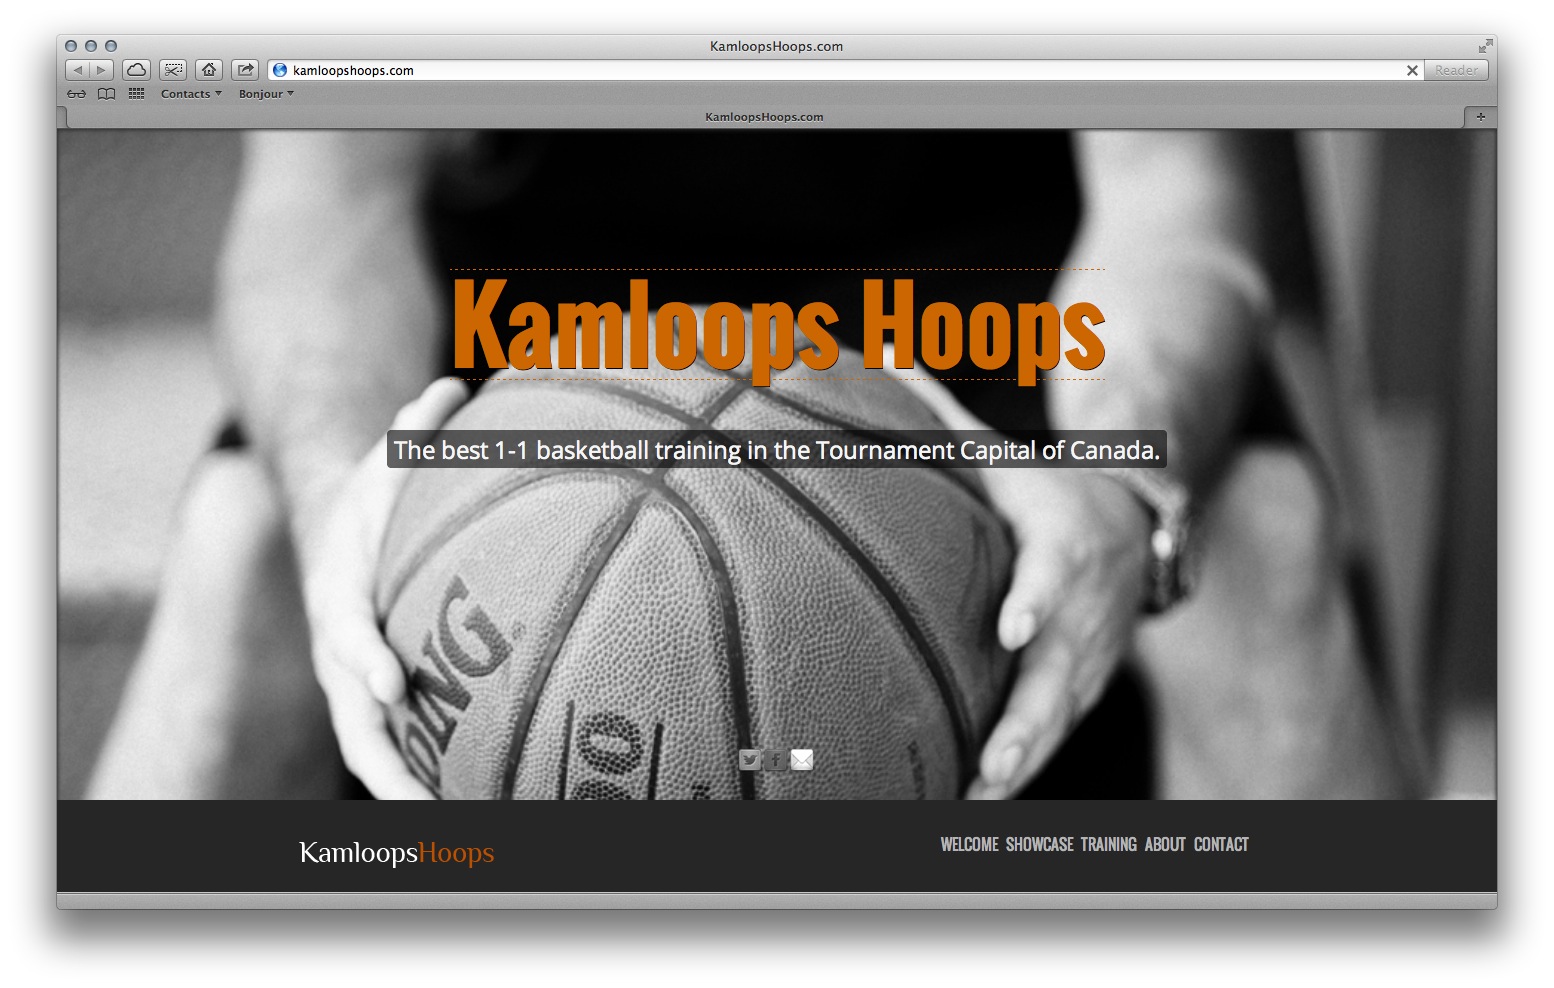 Client Spotlight: KamloopsHoops, Clear Communication Produces Results